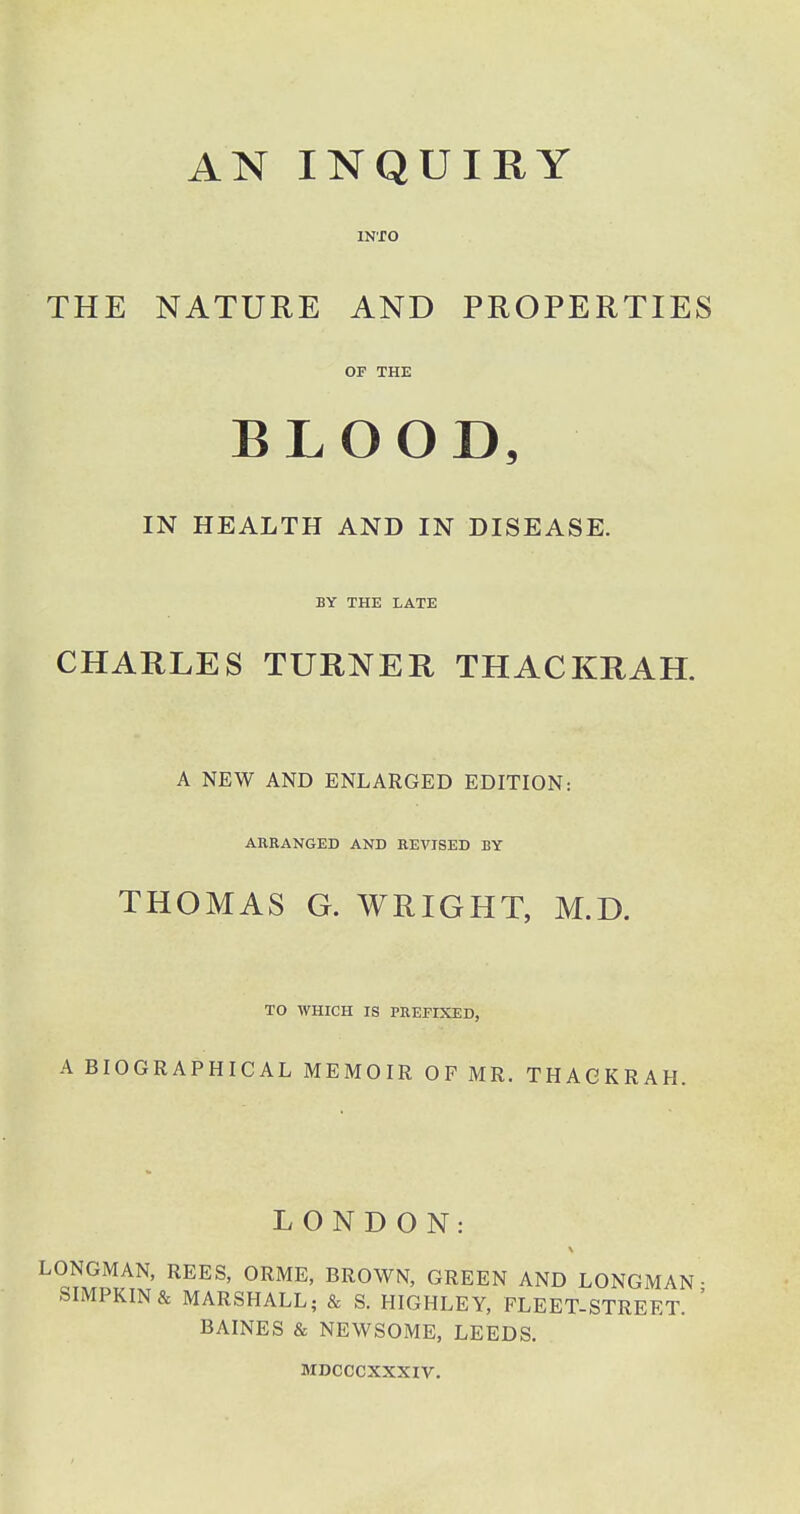 AN INQUIRY INTO THE NATURE AND PROPERTIES or THE BLOOD, IN HEALTH AND IN DISEASE. BY THE LATE CHARLES TURNER THACKRAH. A NEW AND ENLARGED EDITION: ARRANGED AND REVISED BY THOMAS G. WRIGHT, M.D. TO WHICH IS PREFIXED, A BIOGRAPHICAL MEMOIR OF MR. THACKRAH. LONDON: LONGMAN, REES, ORME, BROWN, GREEN AND LONGMAN- SIMPKIN & MARSHALL; & S. HIGHLEY, FLEET-STREET. ' BAINES & NEWSOME, LEEDS. MDCCCXXXIV.